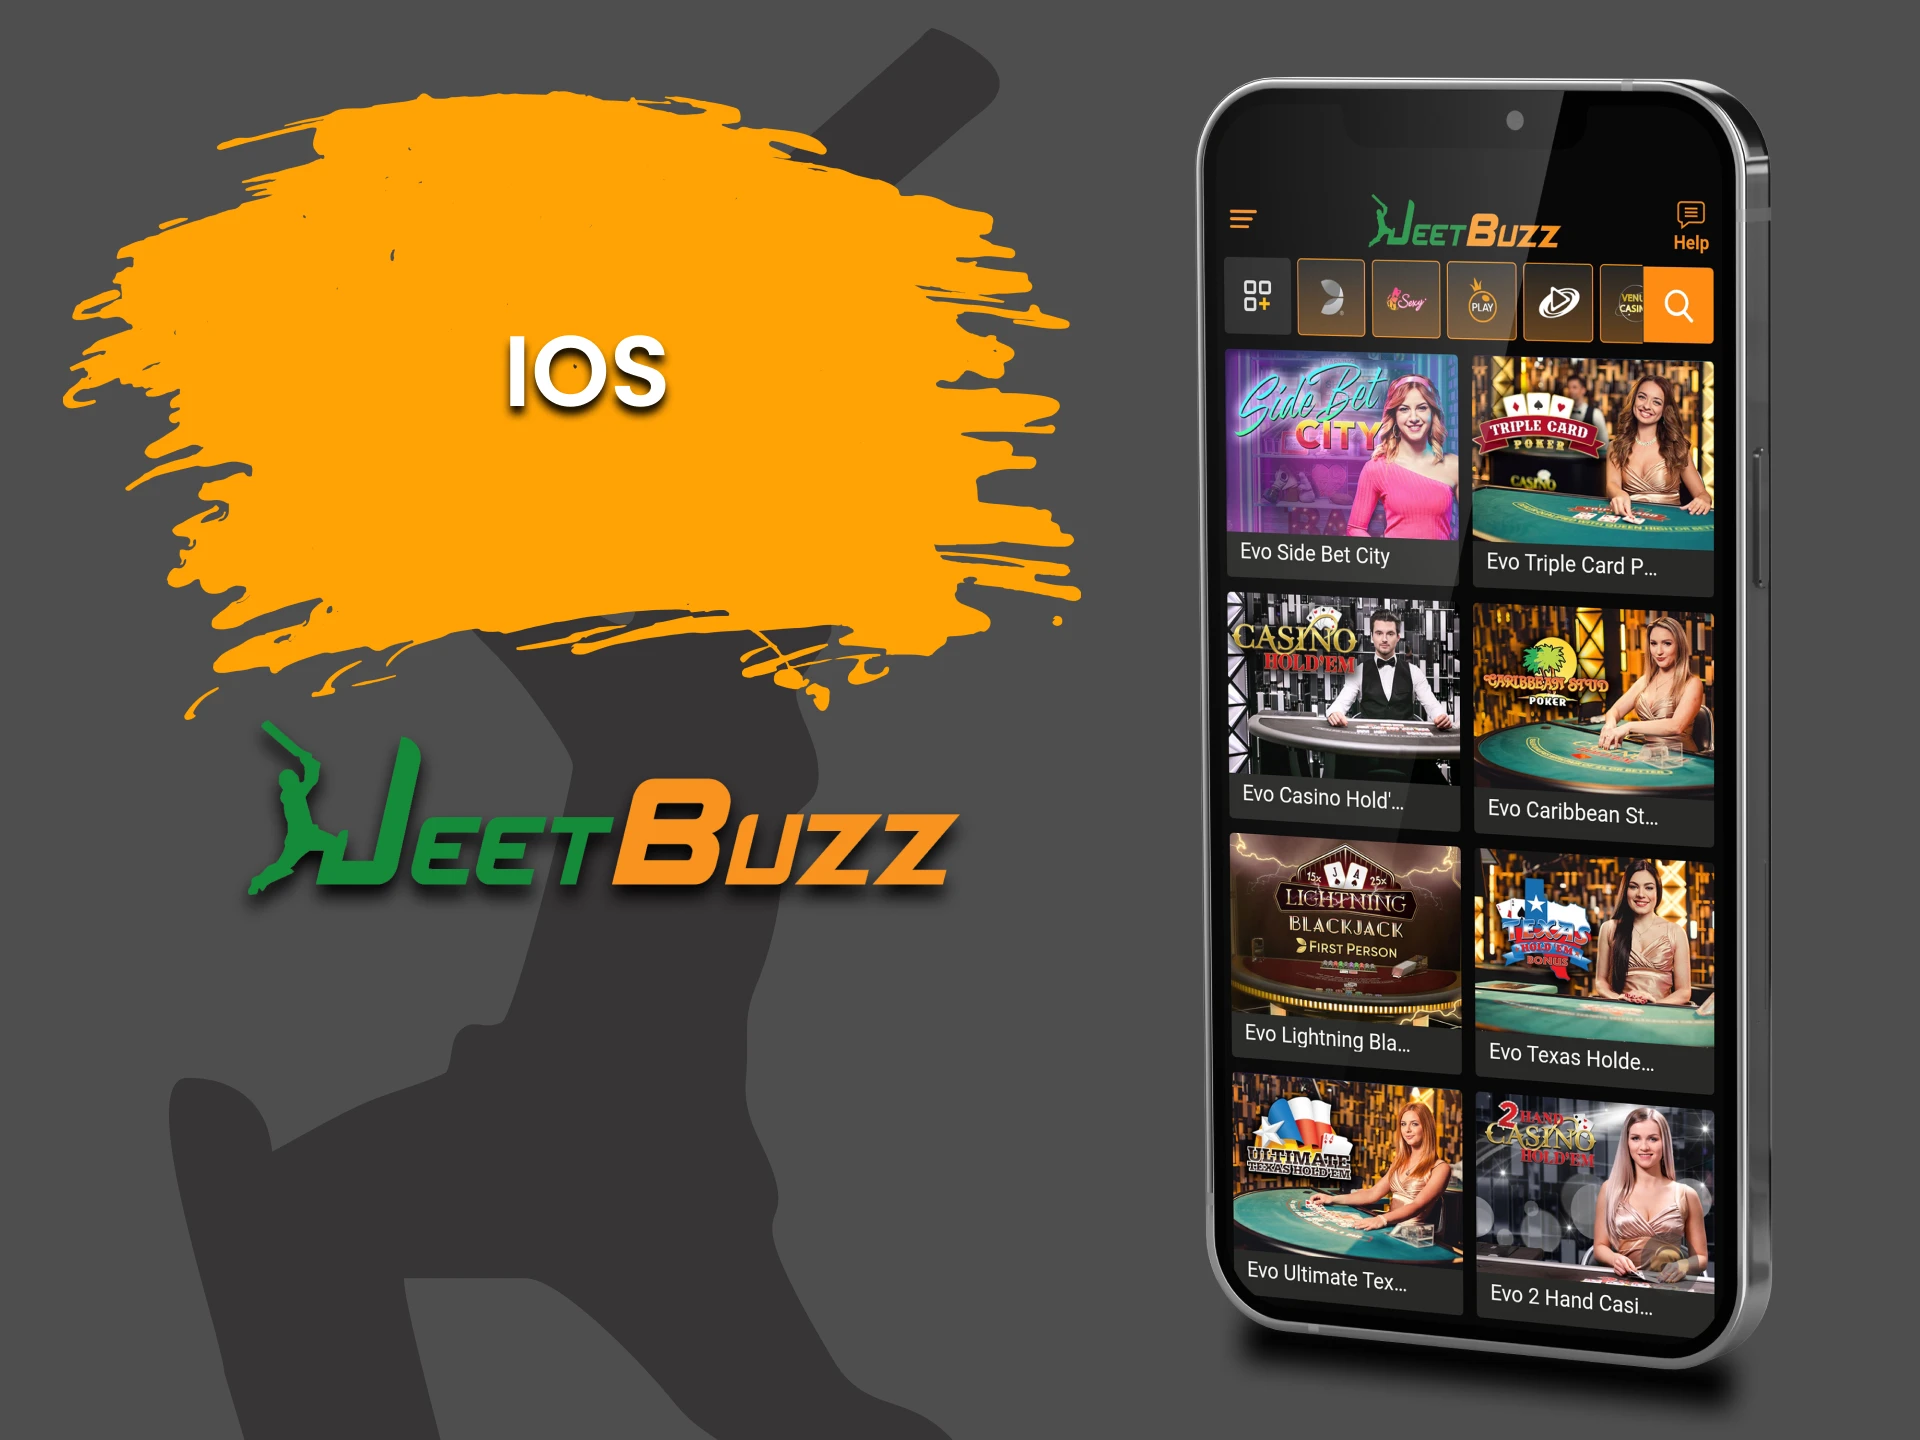 Download the JeetBuzz app on iOS to play Poker.